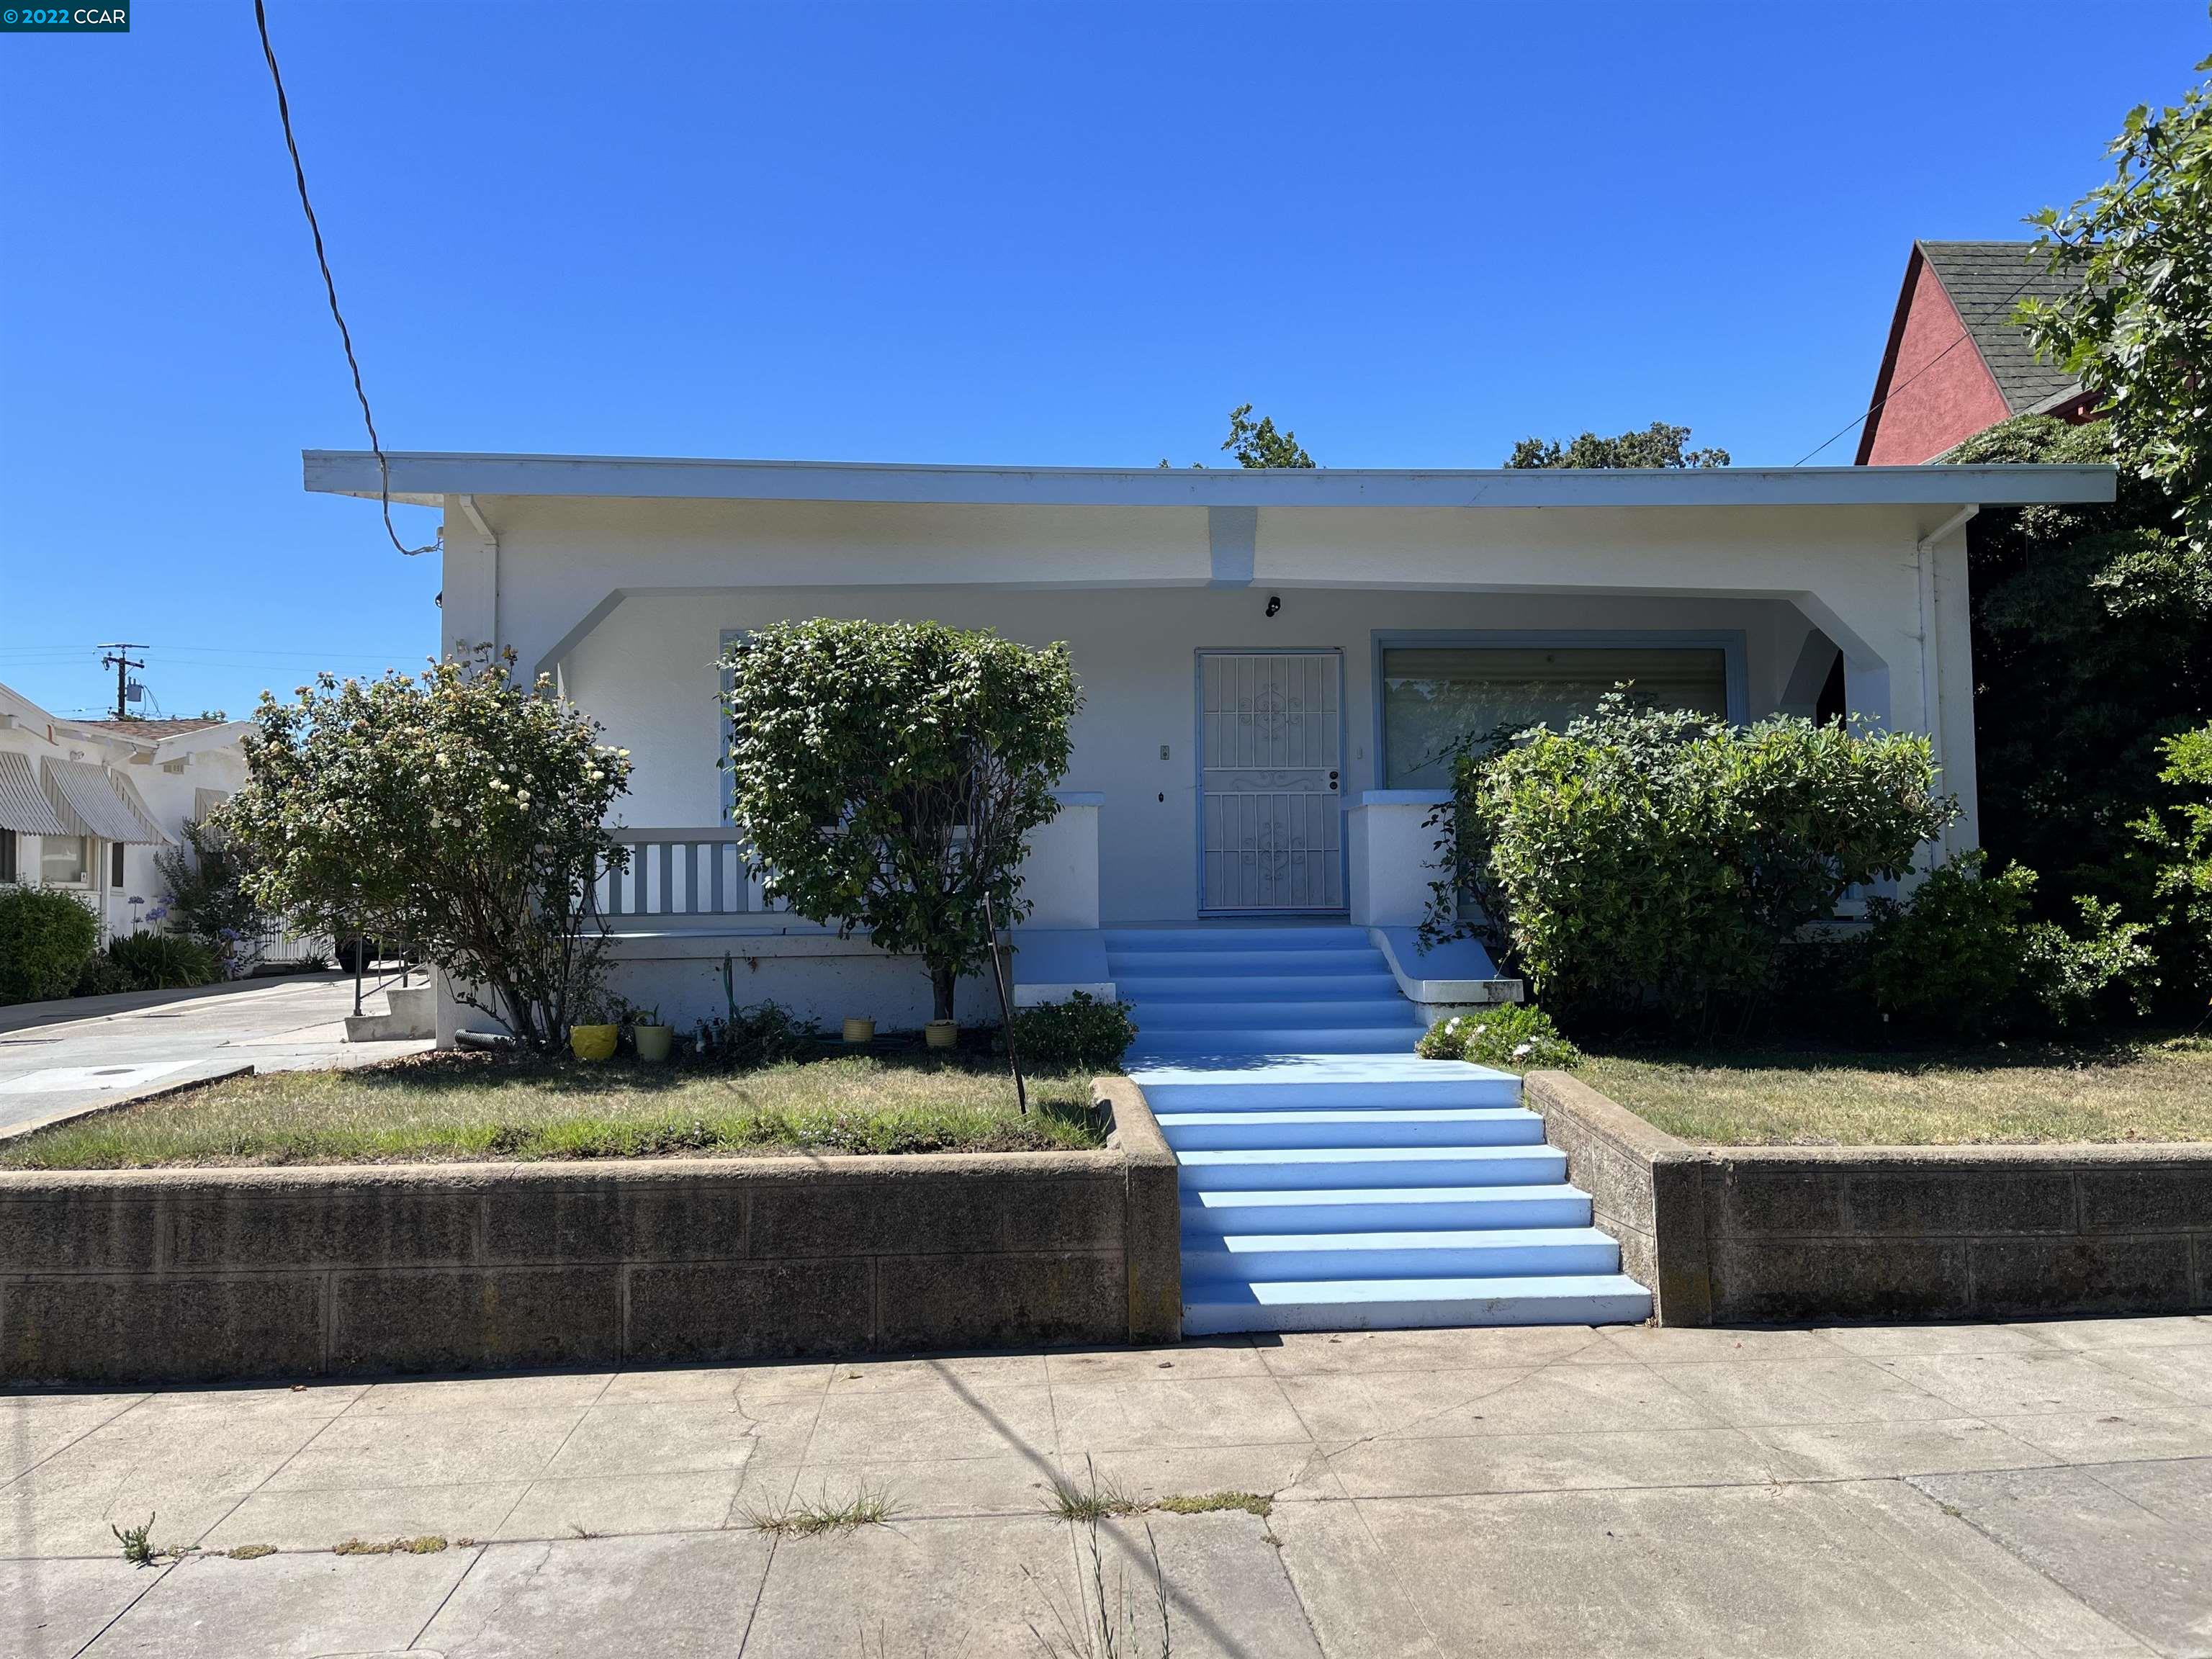 Large 1649 Sq. Foot California Bungalow walking distance to downtown.  Cool River breezes for this one story home.  Original hardwood floors and other craftsman 1925 details.  Central heat and air.  One car detached garage with side of home parking.  Unusual, special and delightful in many ways.